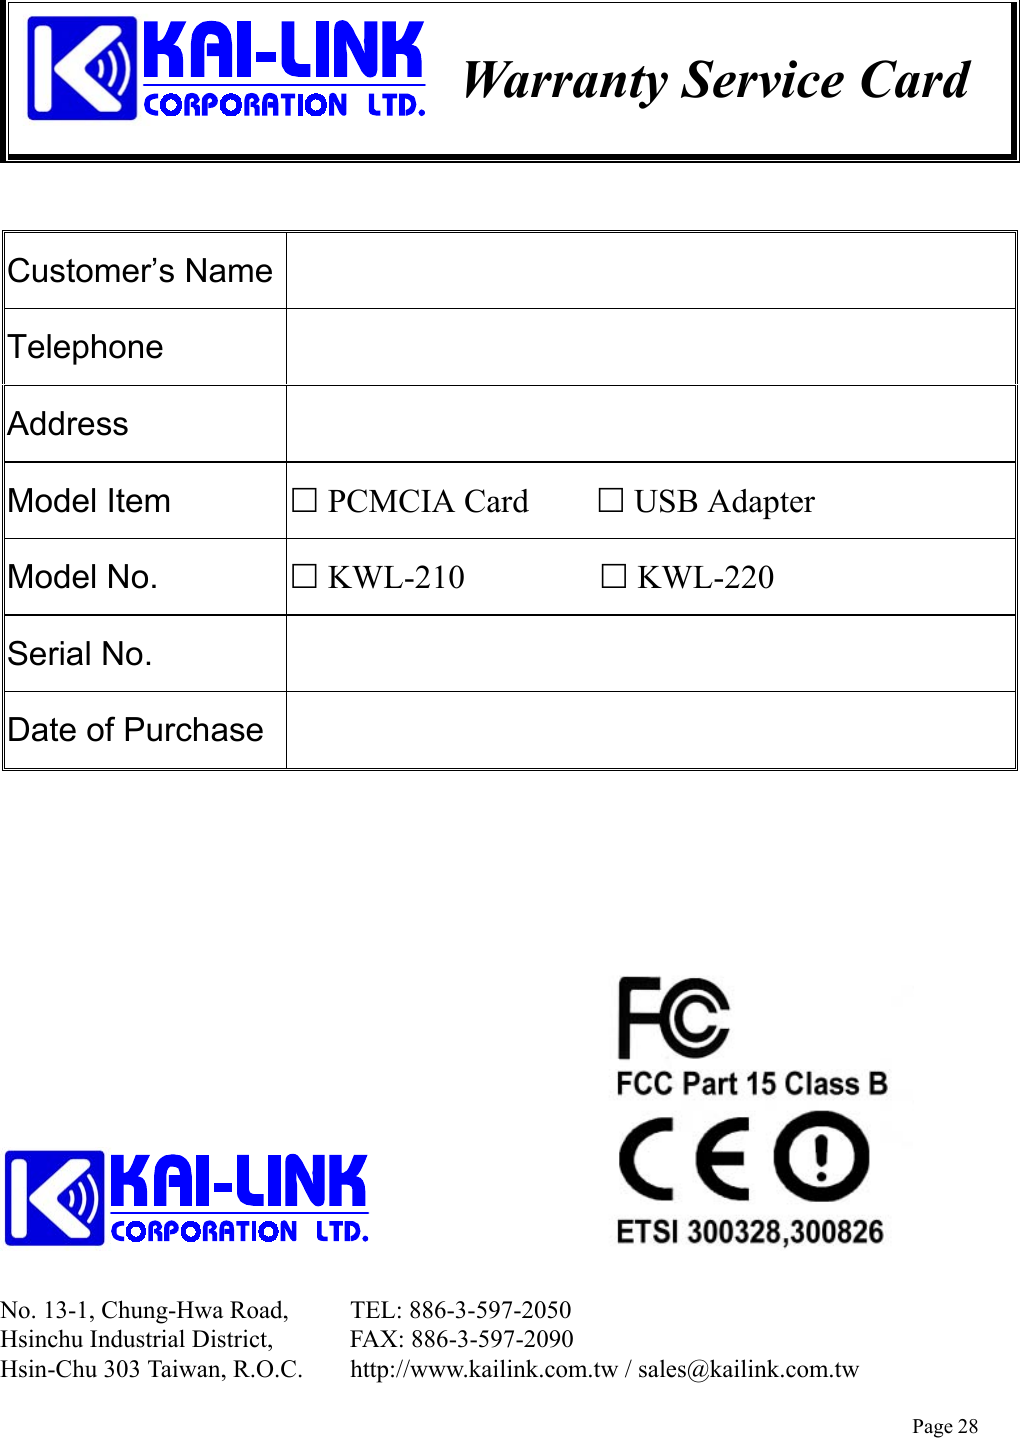  Page 28                                          Warranty Service Card  Customer’s Name   Telephone    Address   Model Item   PCMCIA Card     USB Adapter   Model No.   KWL-210         KWL-220 Serial No.   Date of Purchase                        No. 13-1, Chung-Hwa Road,      TEL: 886-3-597-2050 Hsinchu Industrial District,    FAX: 886-3-597-2090 Hsin-Chu 303 Taiwan, R.O.C.    http://www.kailink.com.tw / sales@kailink.com.tw 